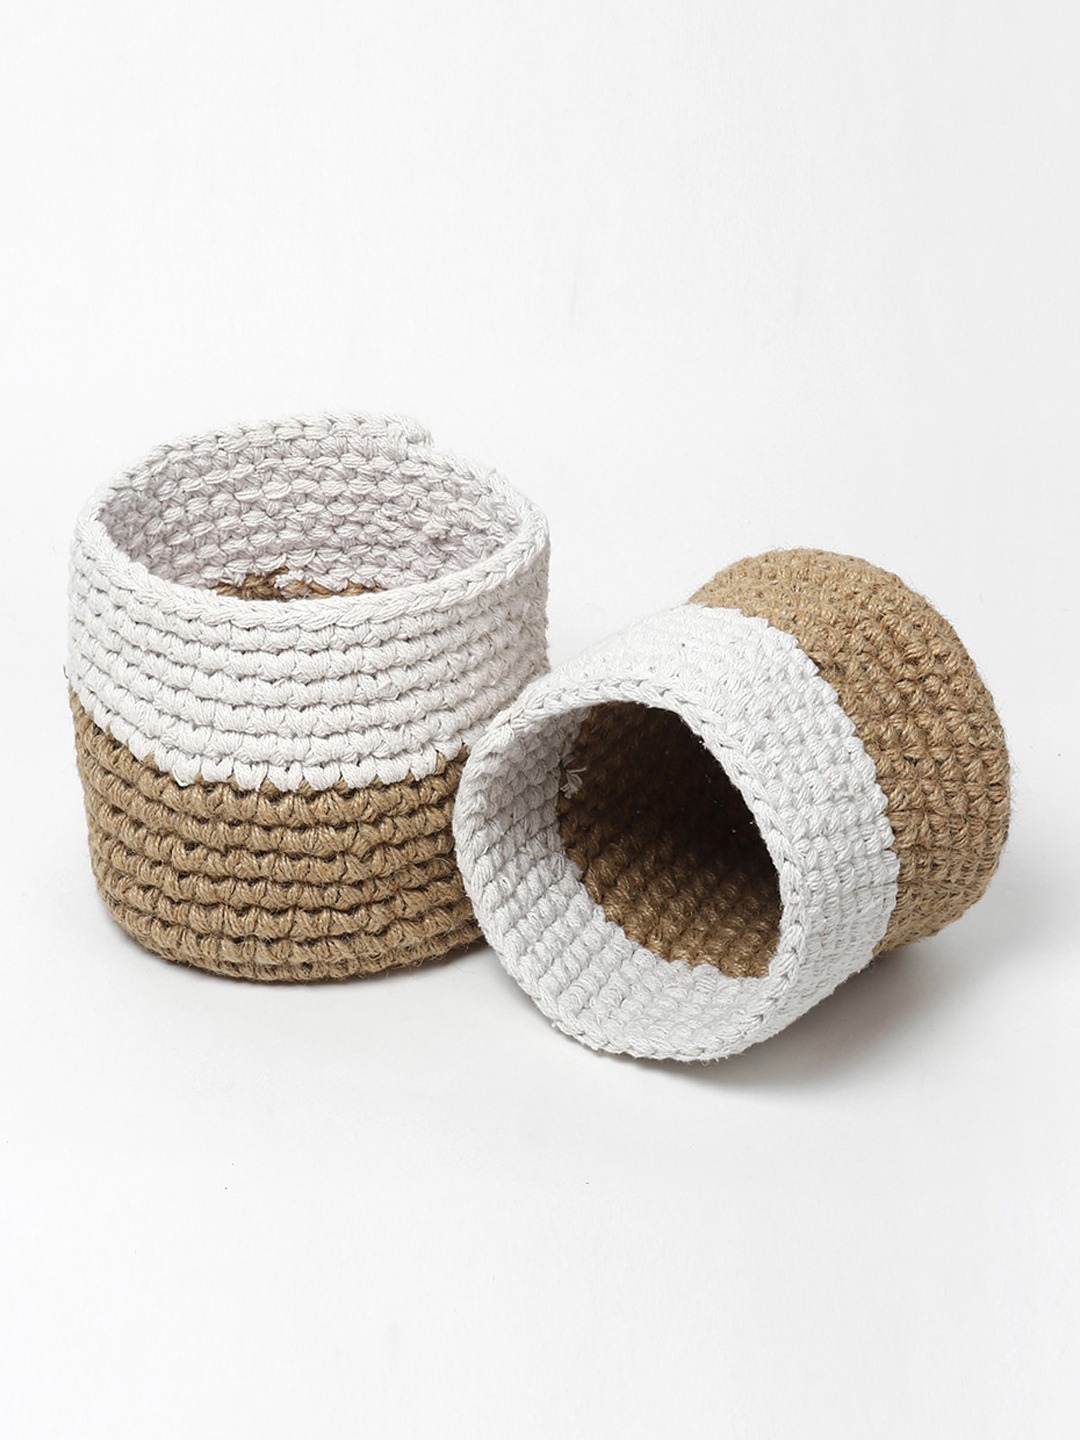 White and Brown Set of 2 Color blocked Jute Crochet Baskets